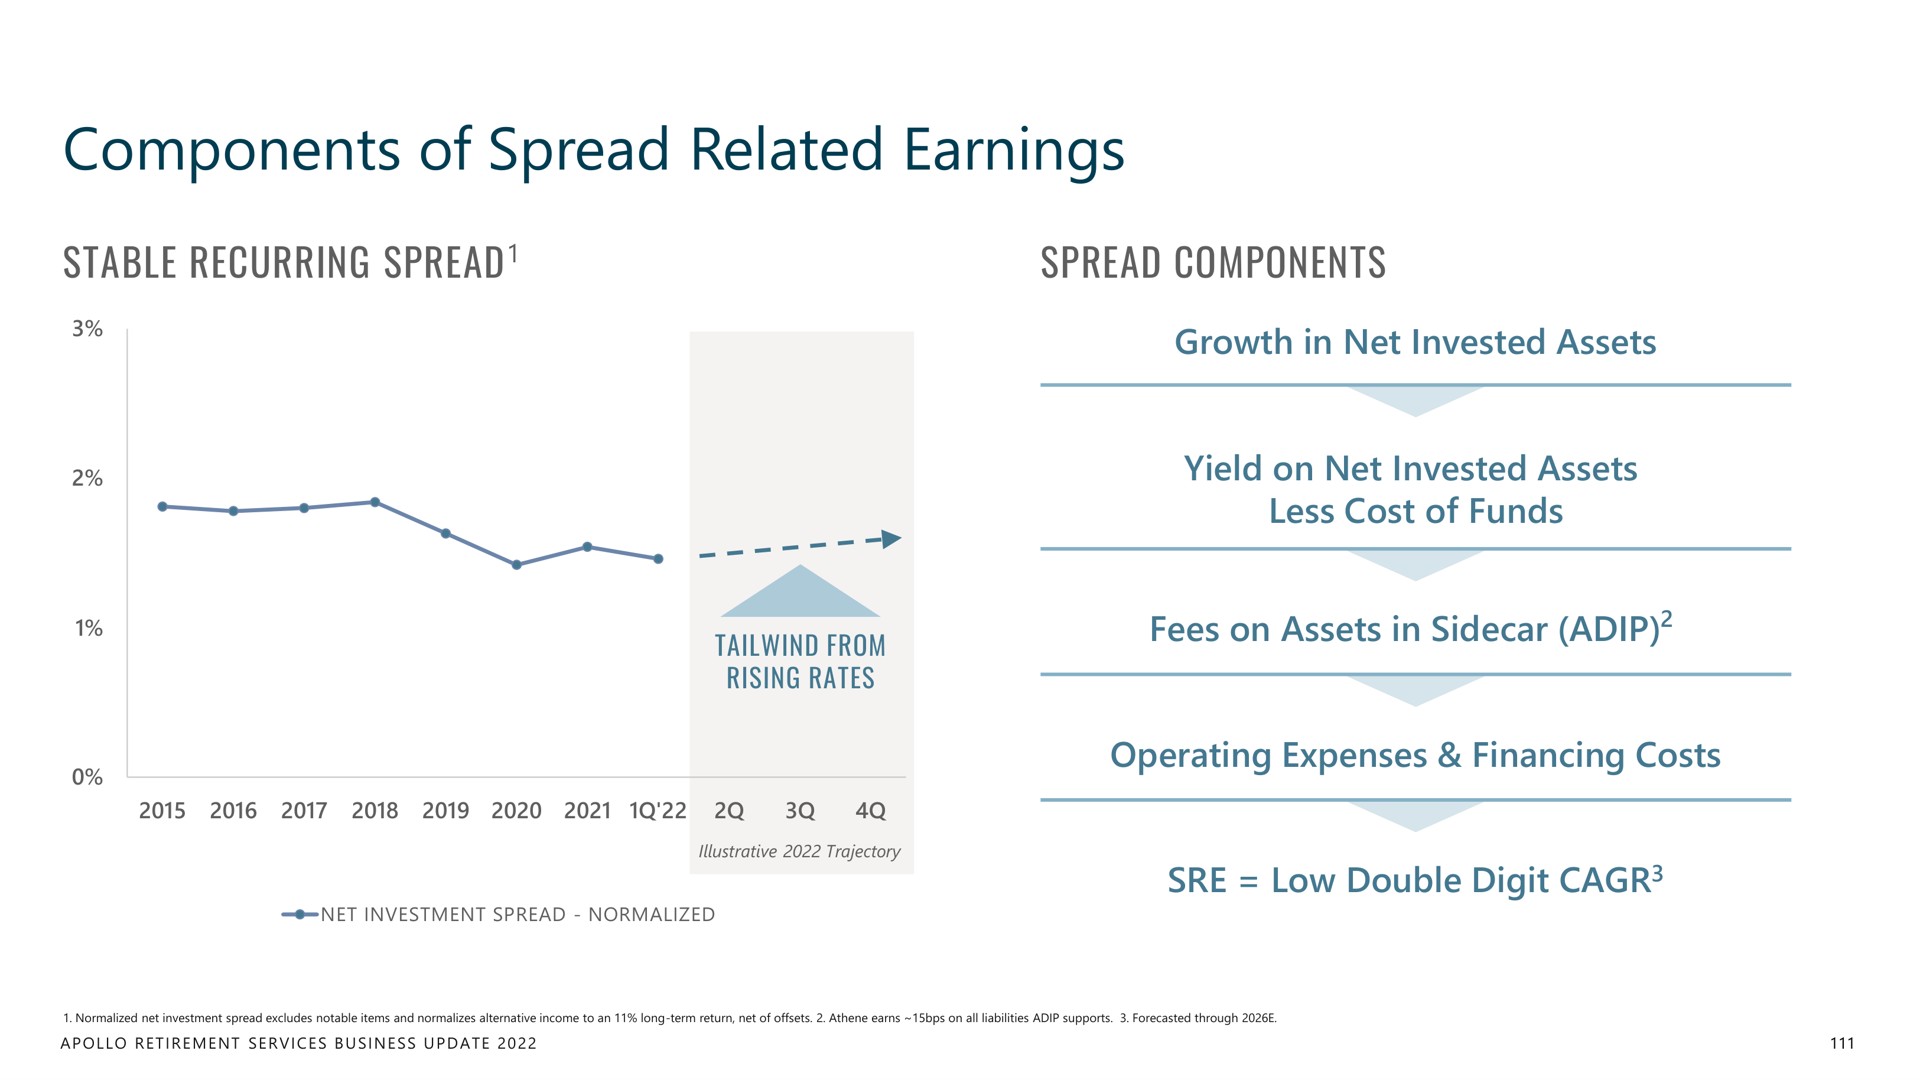 components of spread related earnings | Apollo Global Management